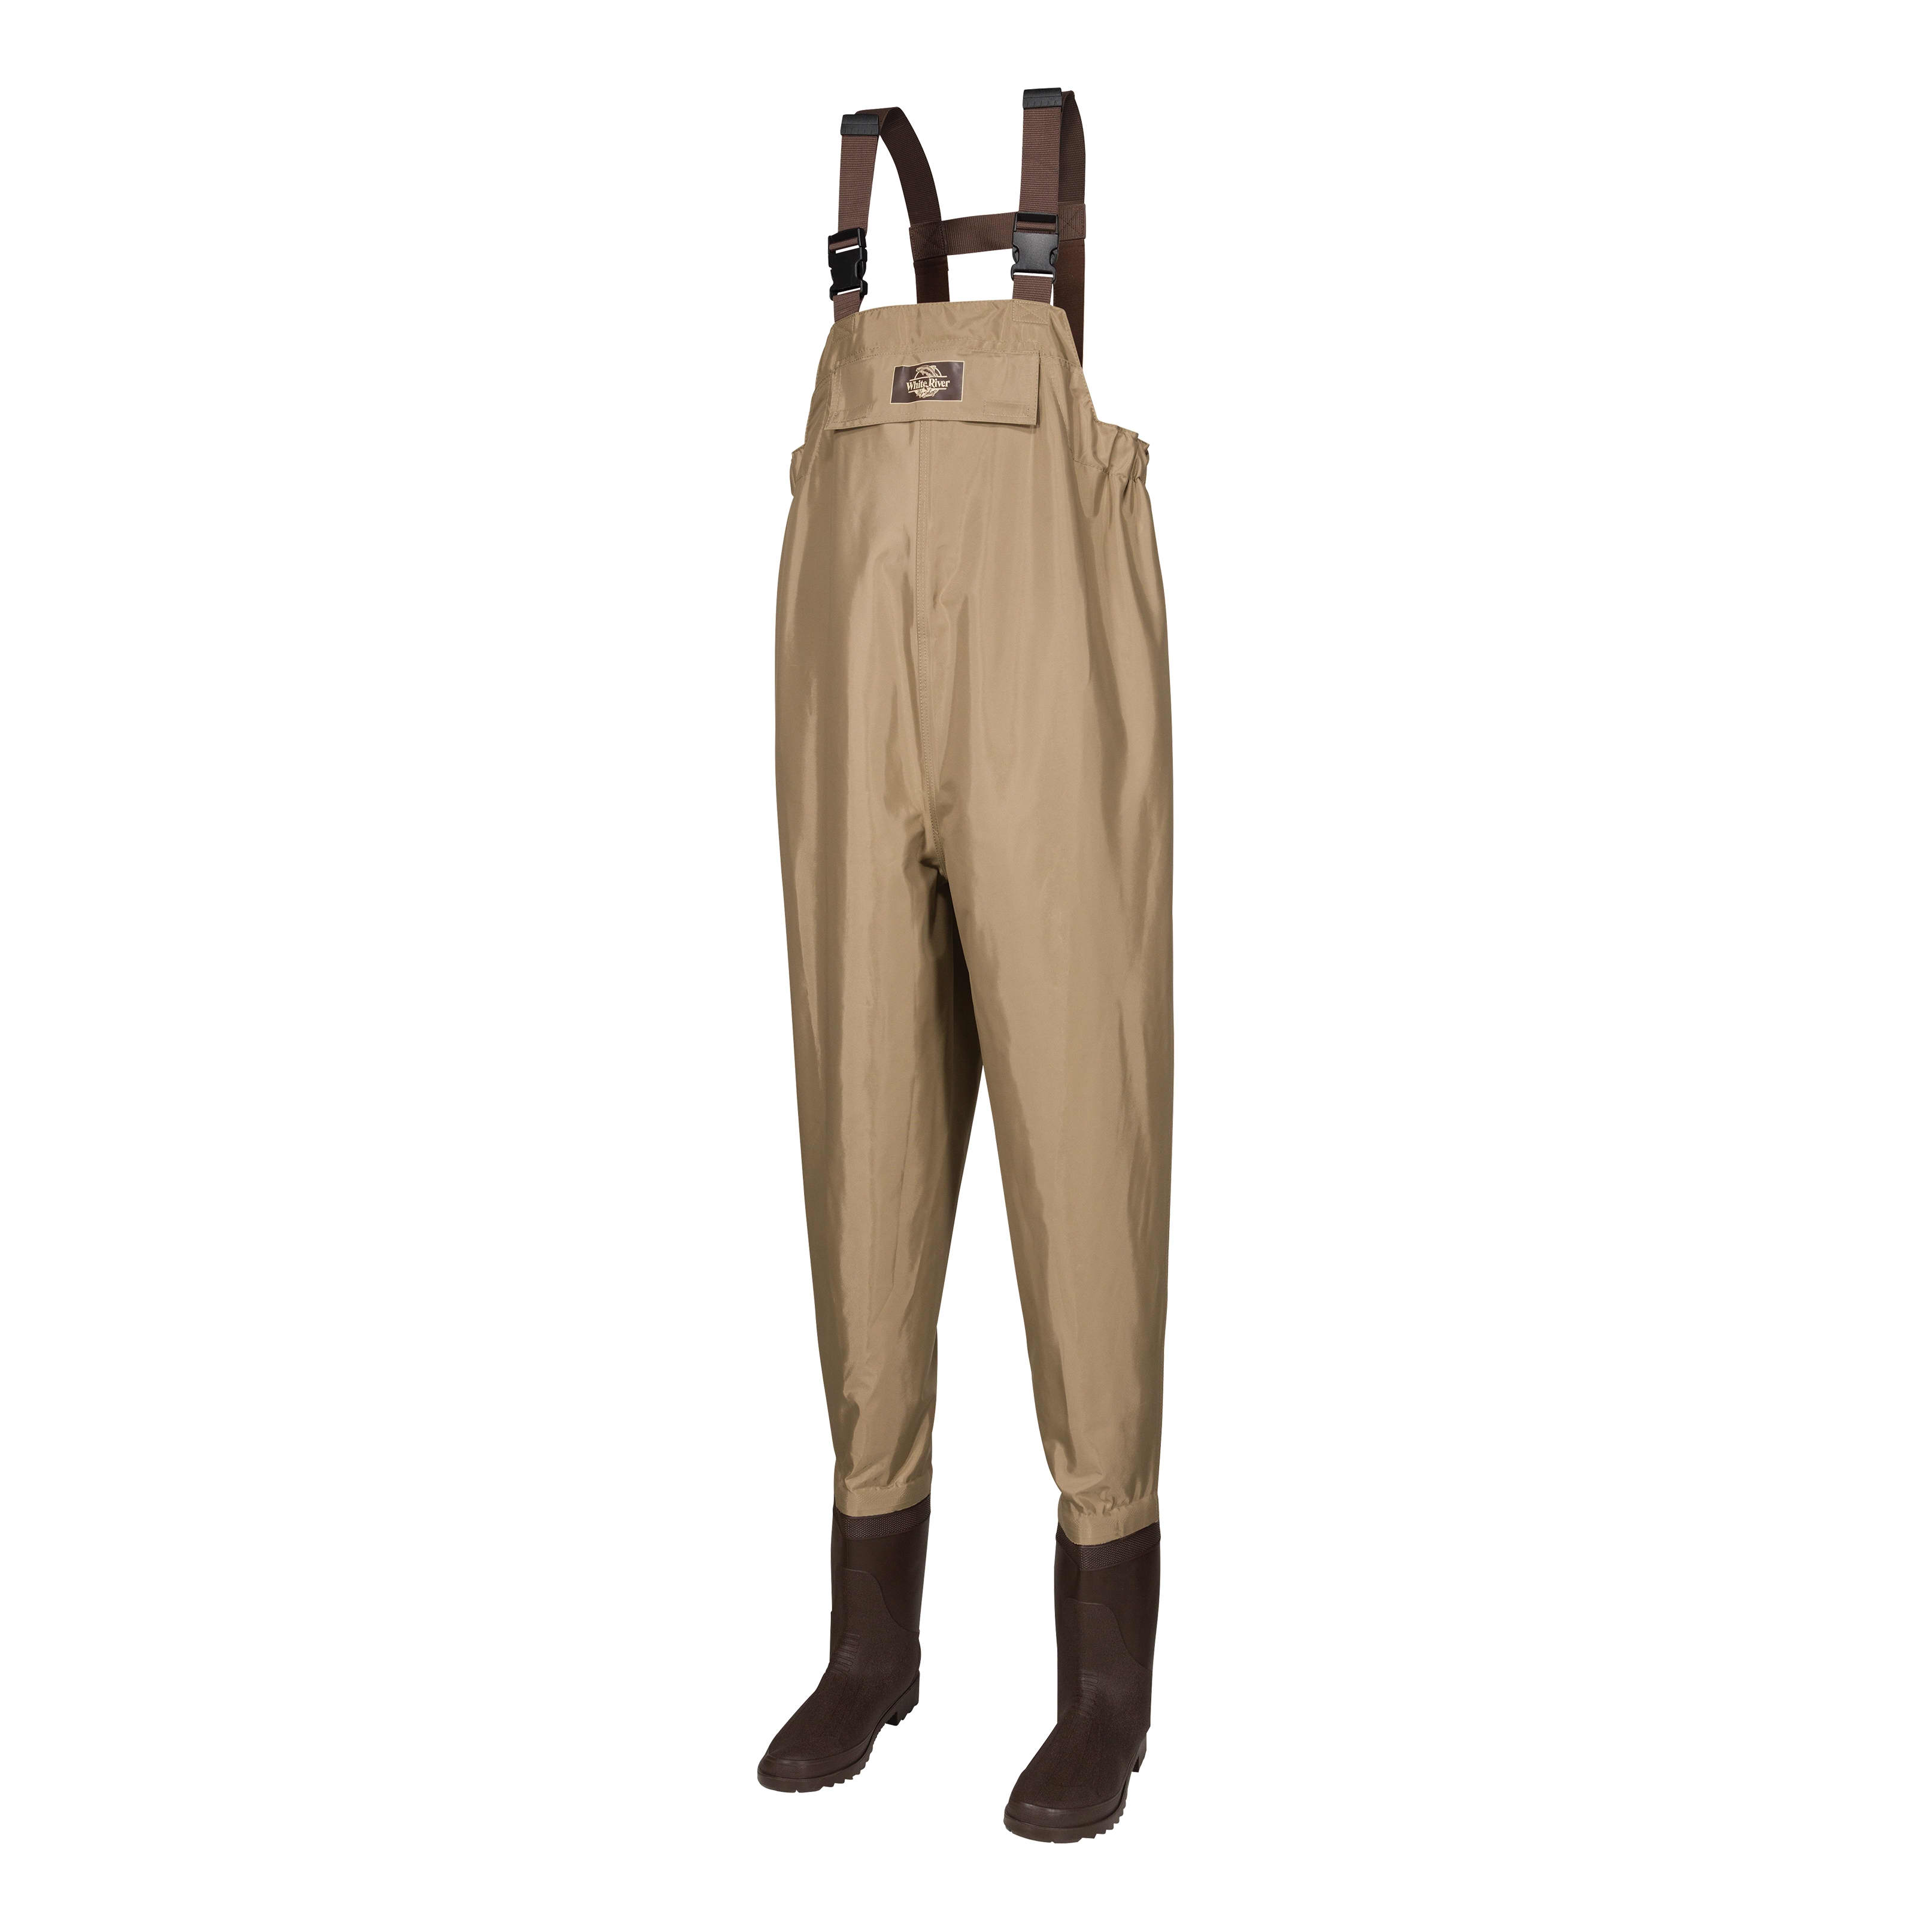 White River Women’s Three Forks Lug-Sole Waders